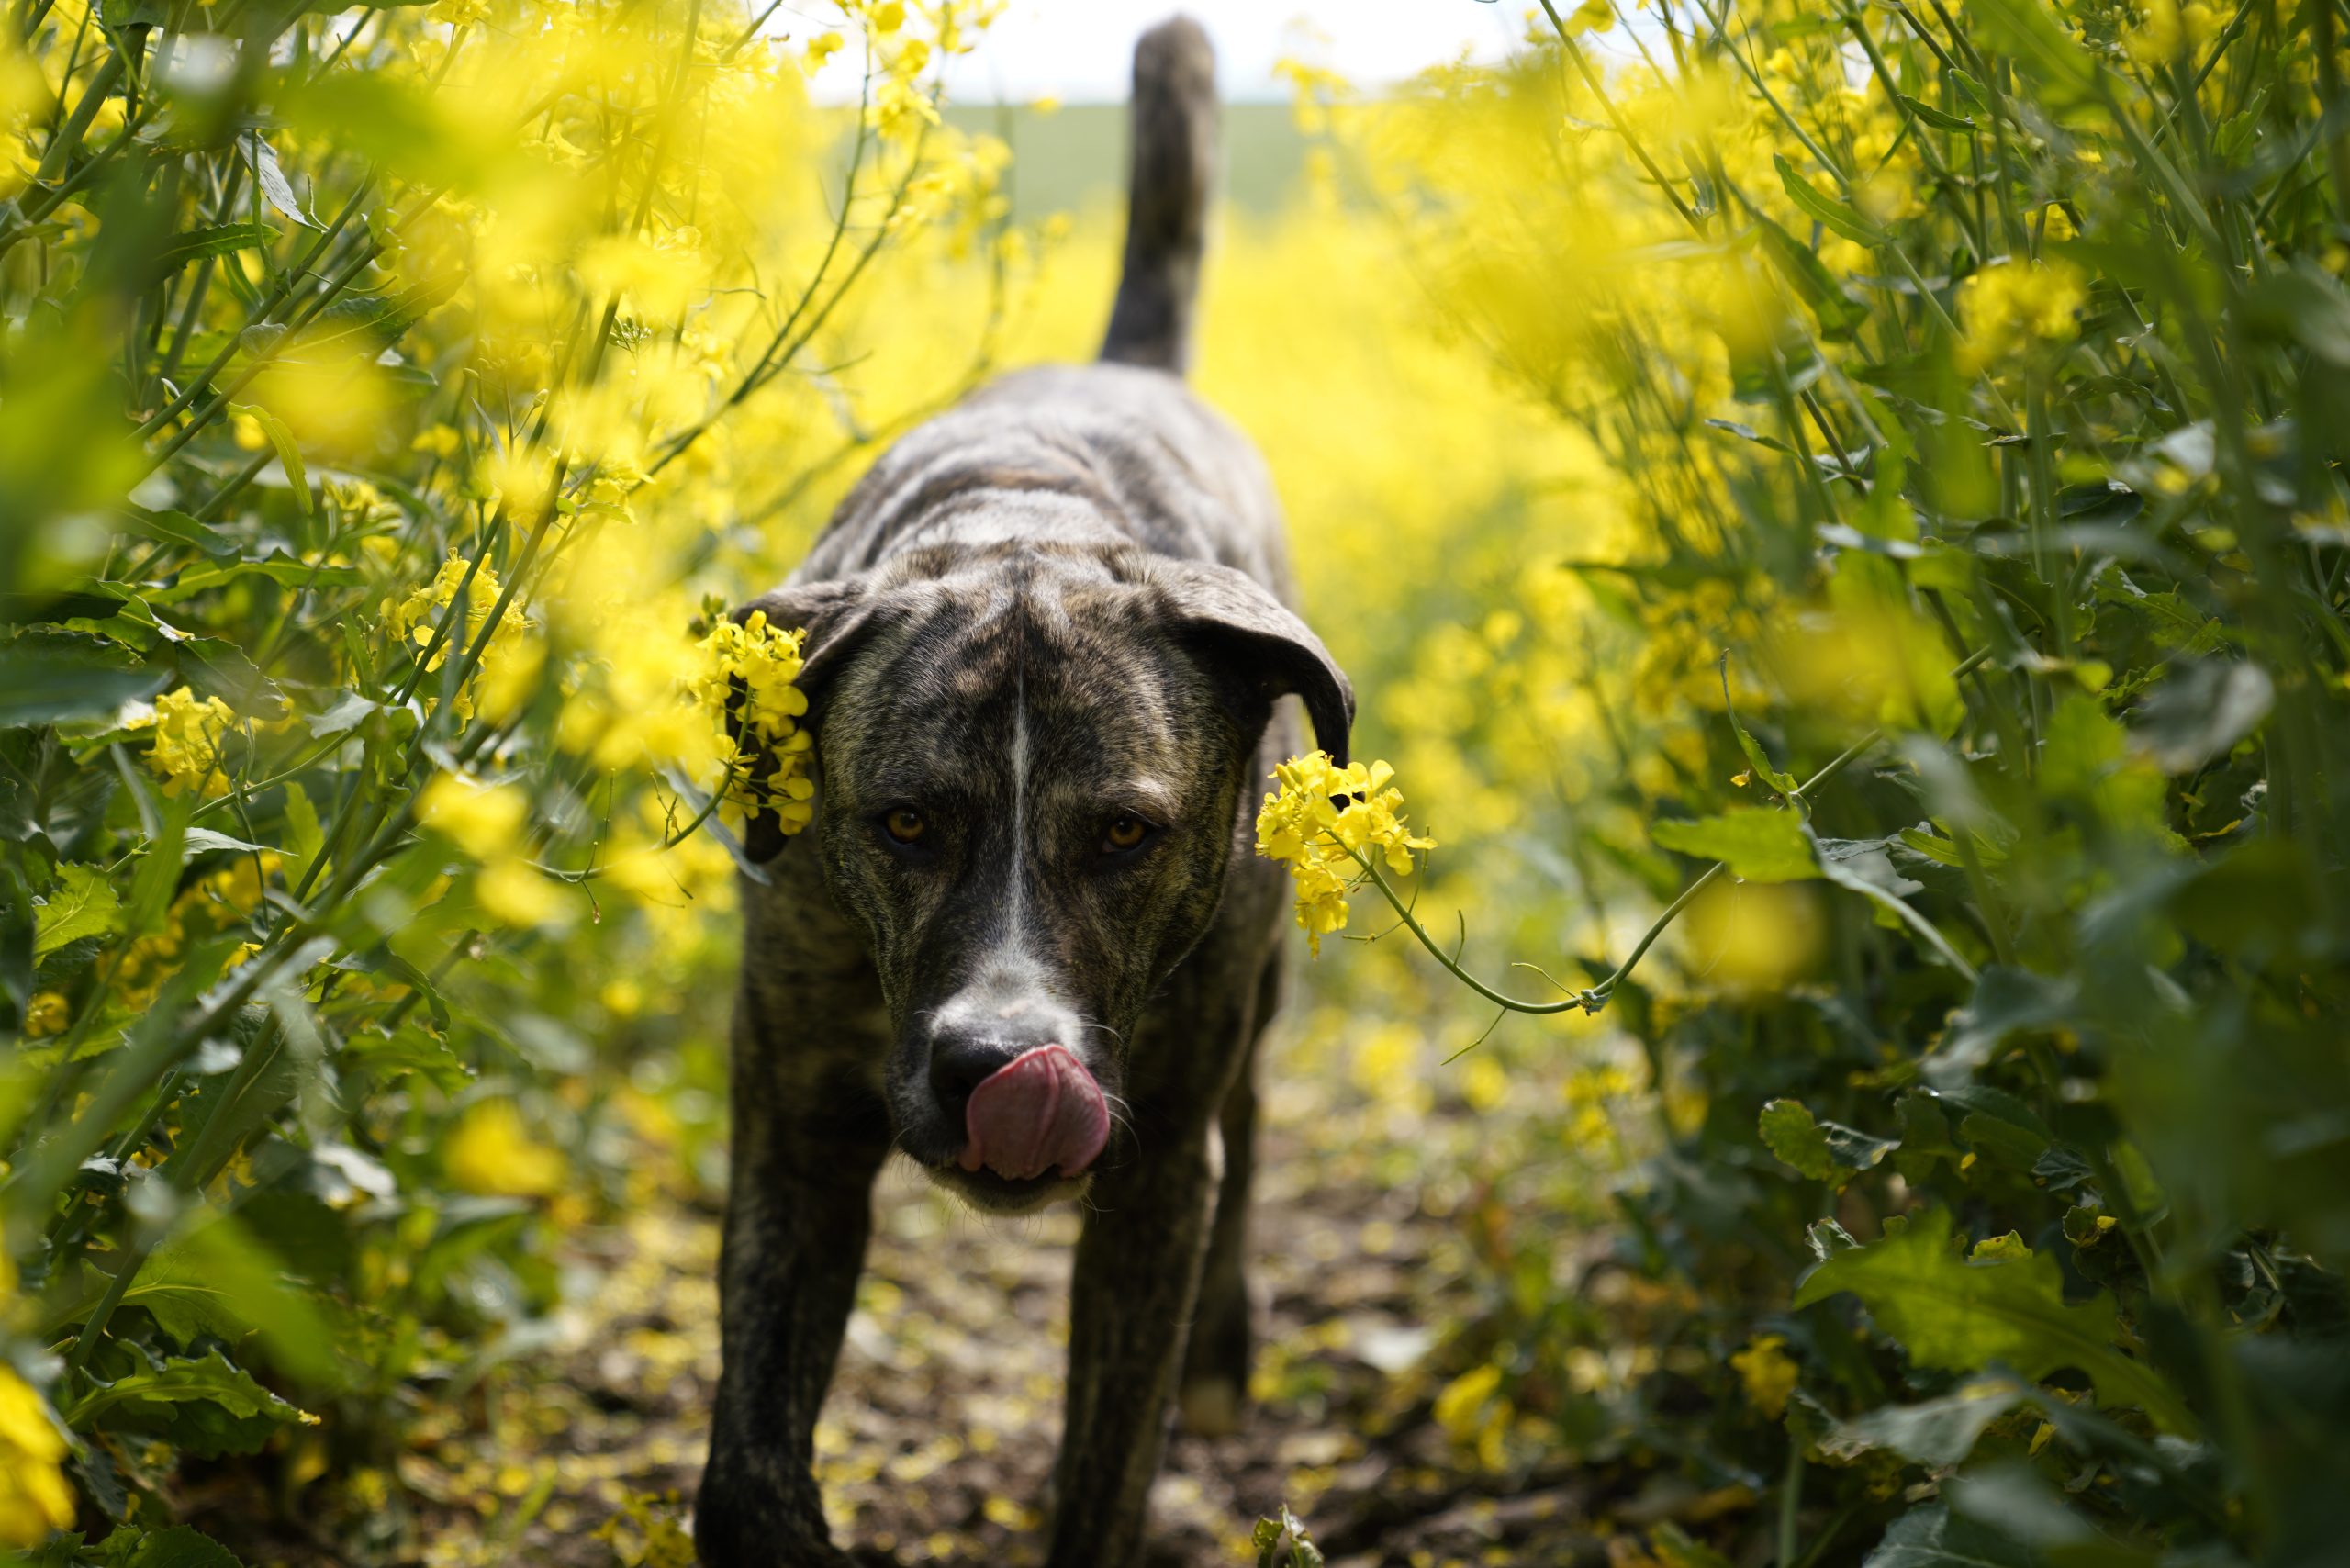 Pet owners warned over rapeseed dangers